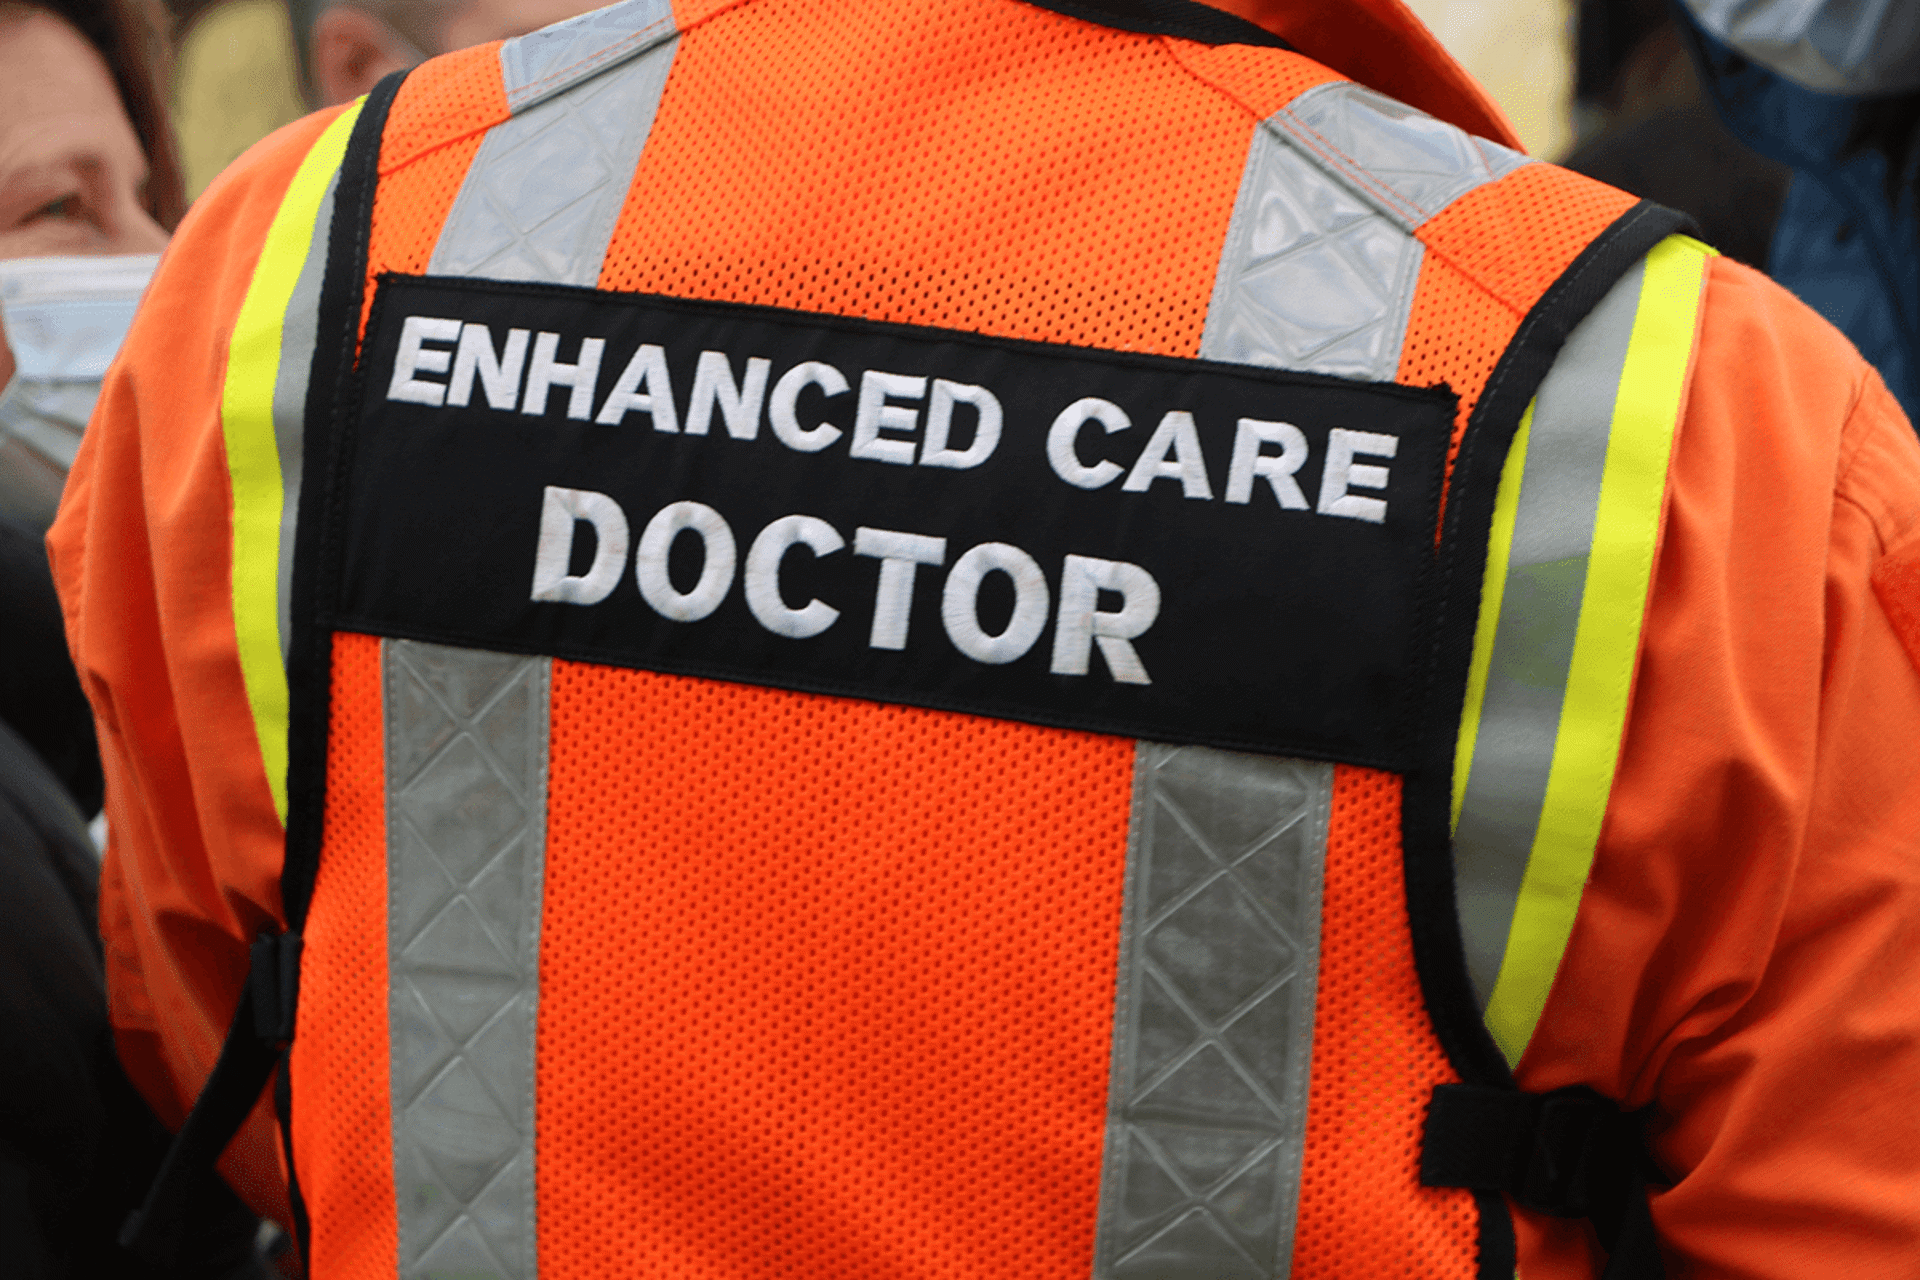 A close up of a person's back wearing and orange flight suit and vest with 'enhanced care doctor' written on the back